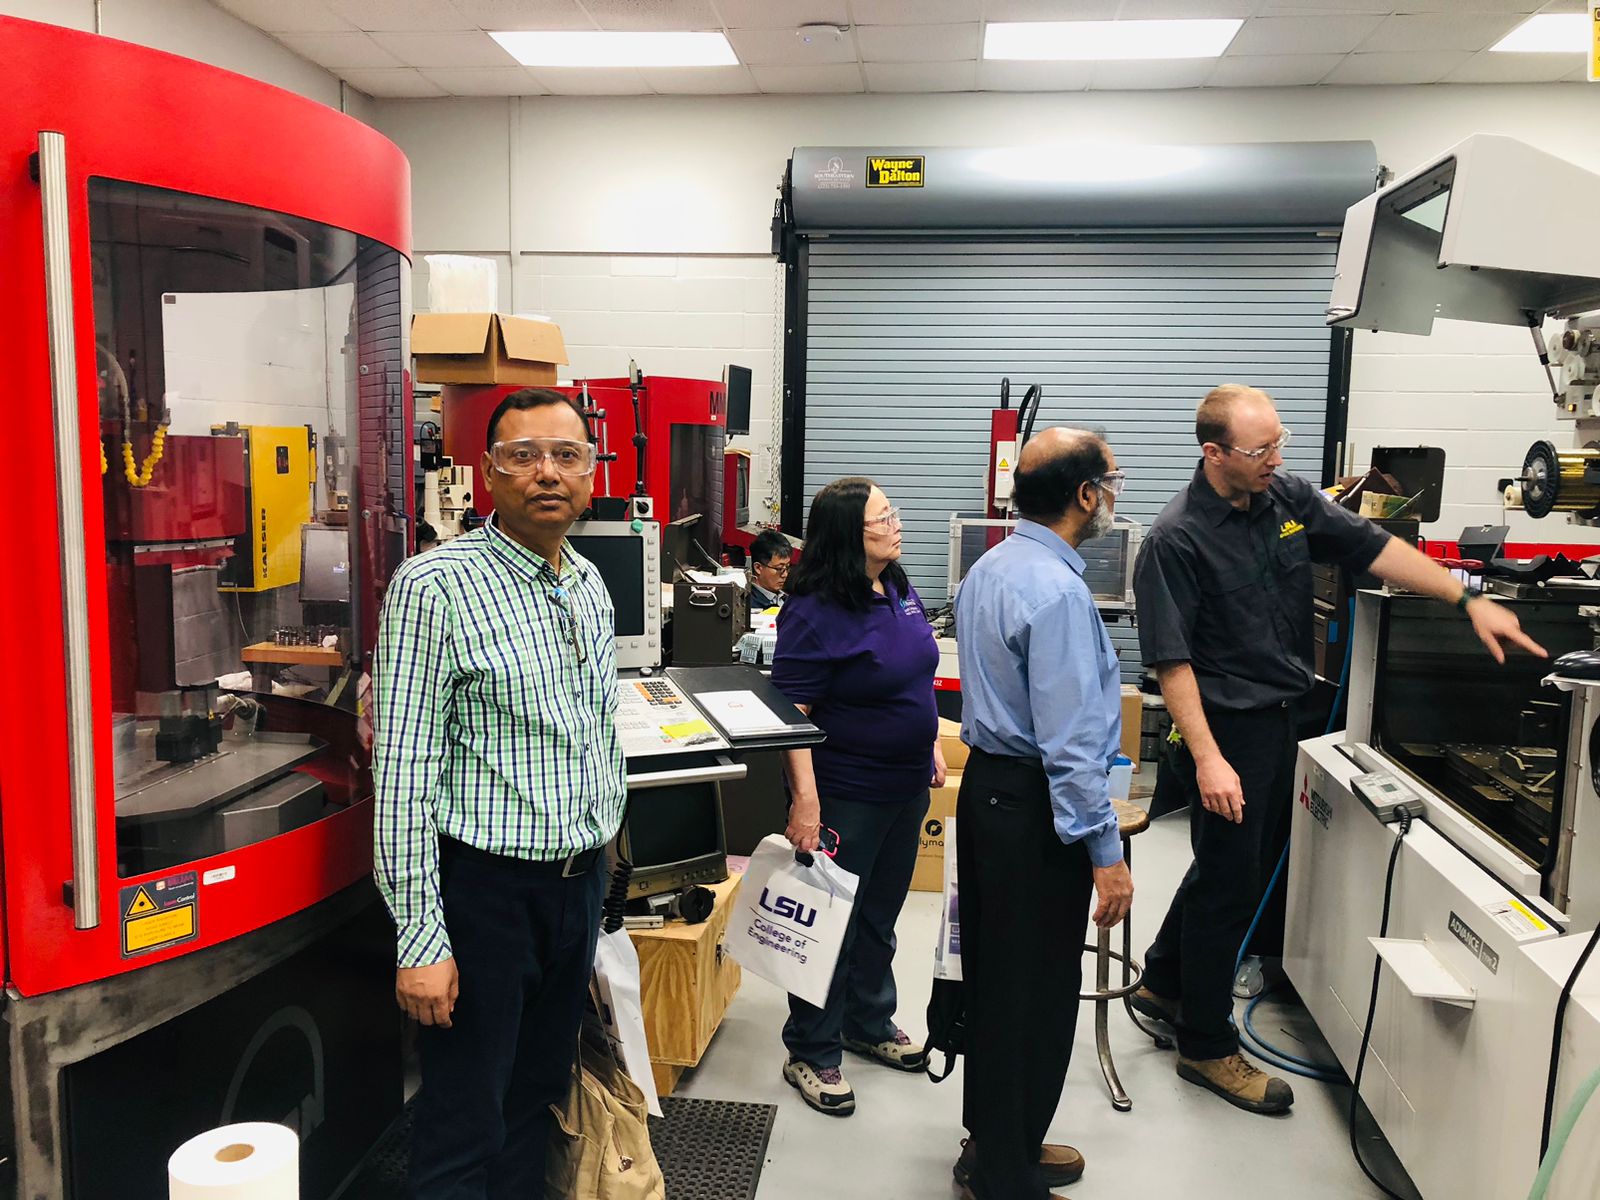 In this photo, personnel from LSU are showing the Fish Innovation Lab research team their mechanical engineering workshop. (Photos provided by Md. Rafiqul Islam Sarder and/or taken by Maria Teresa Gutierrez-Wing)